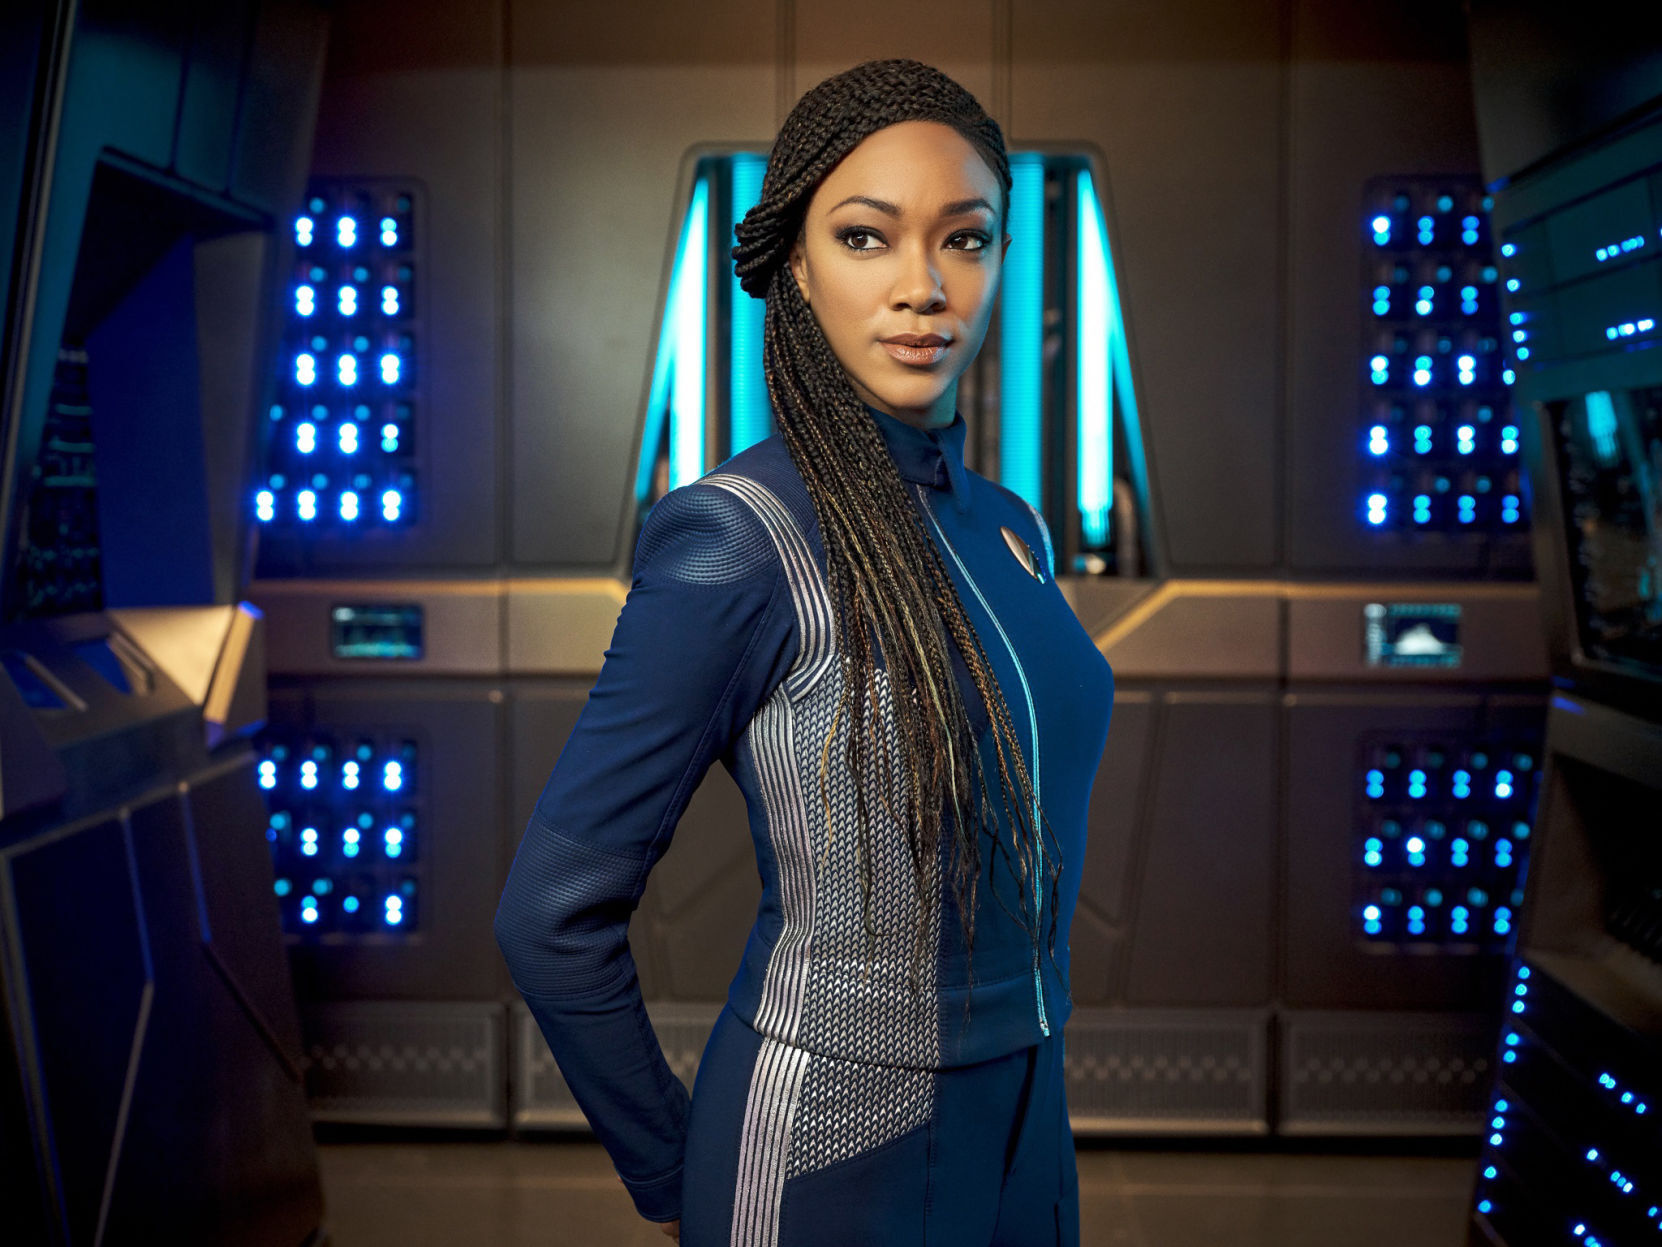 Sonequa Martin-Green stars in a future she hopes one day can be a